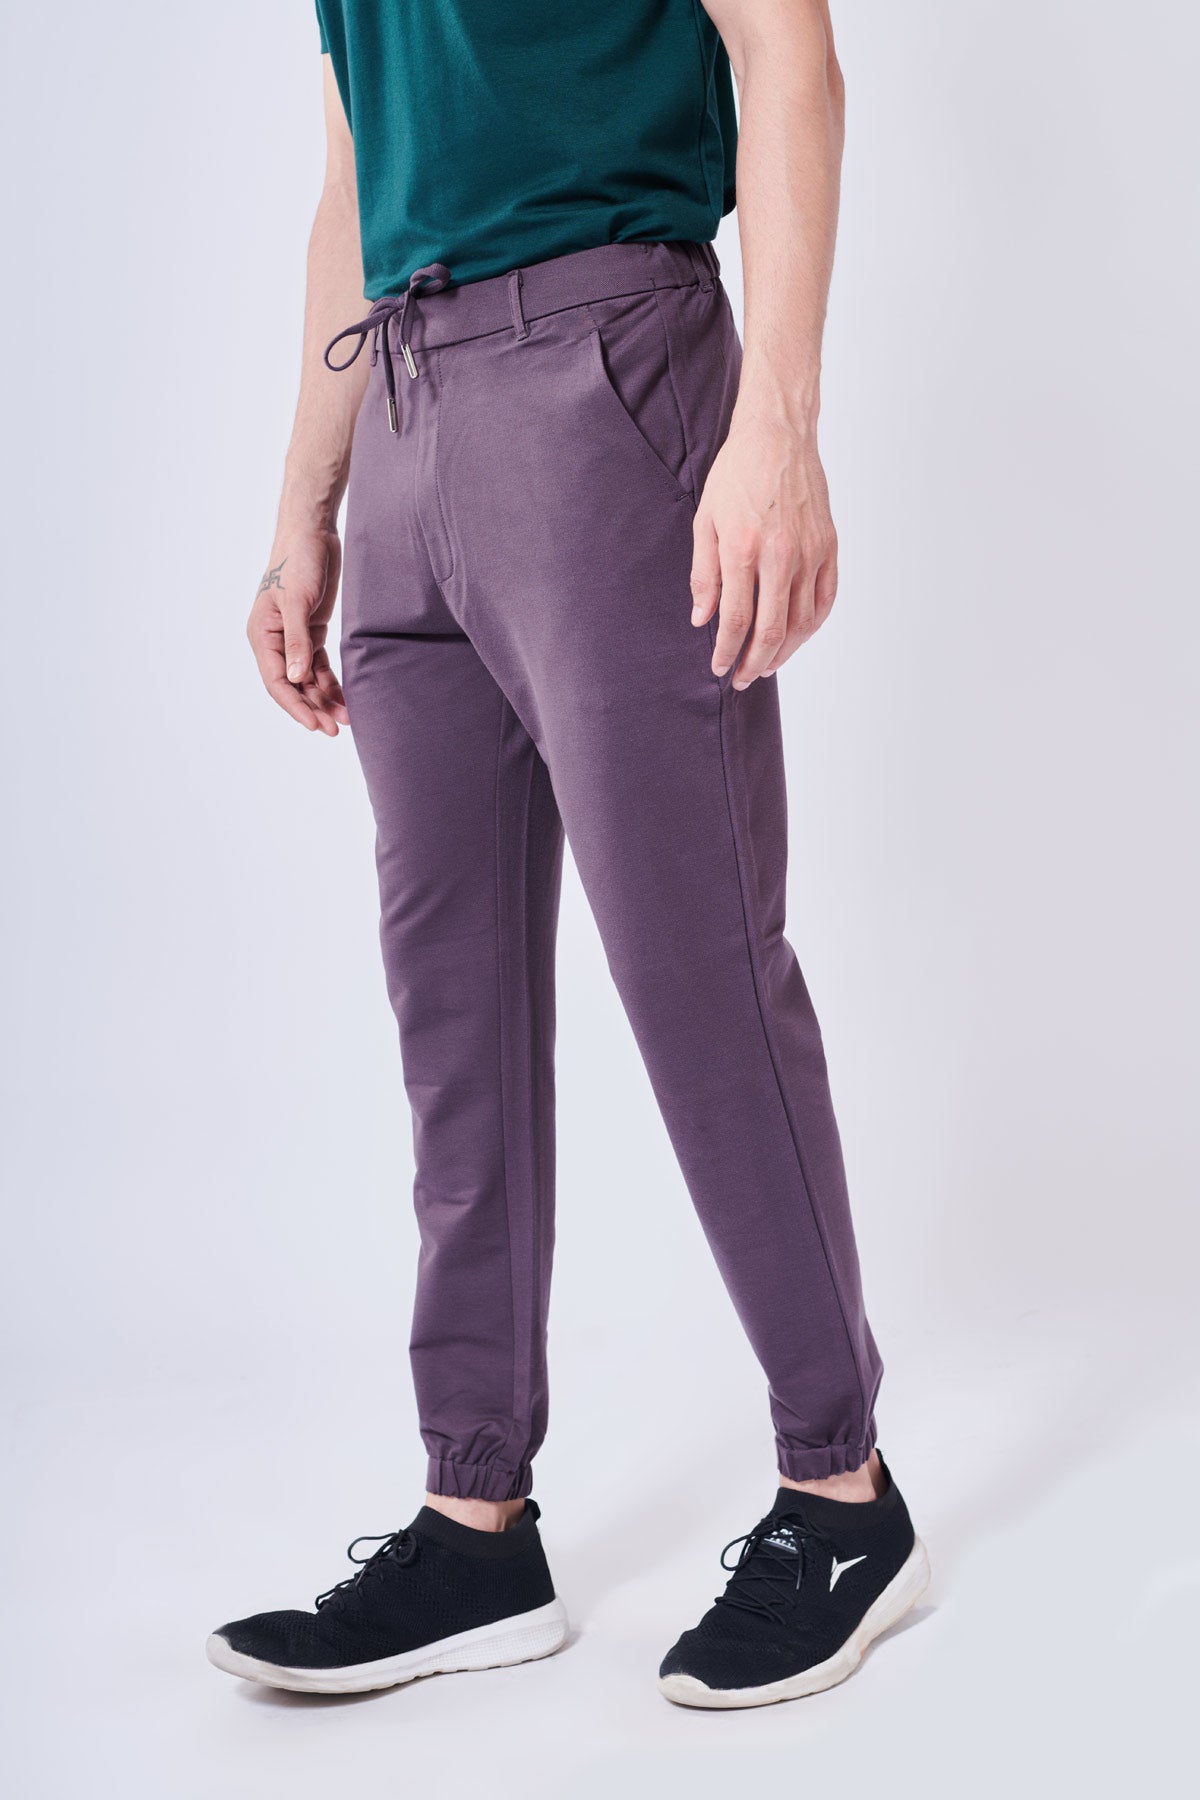 Easy Midnight Violet Pant